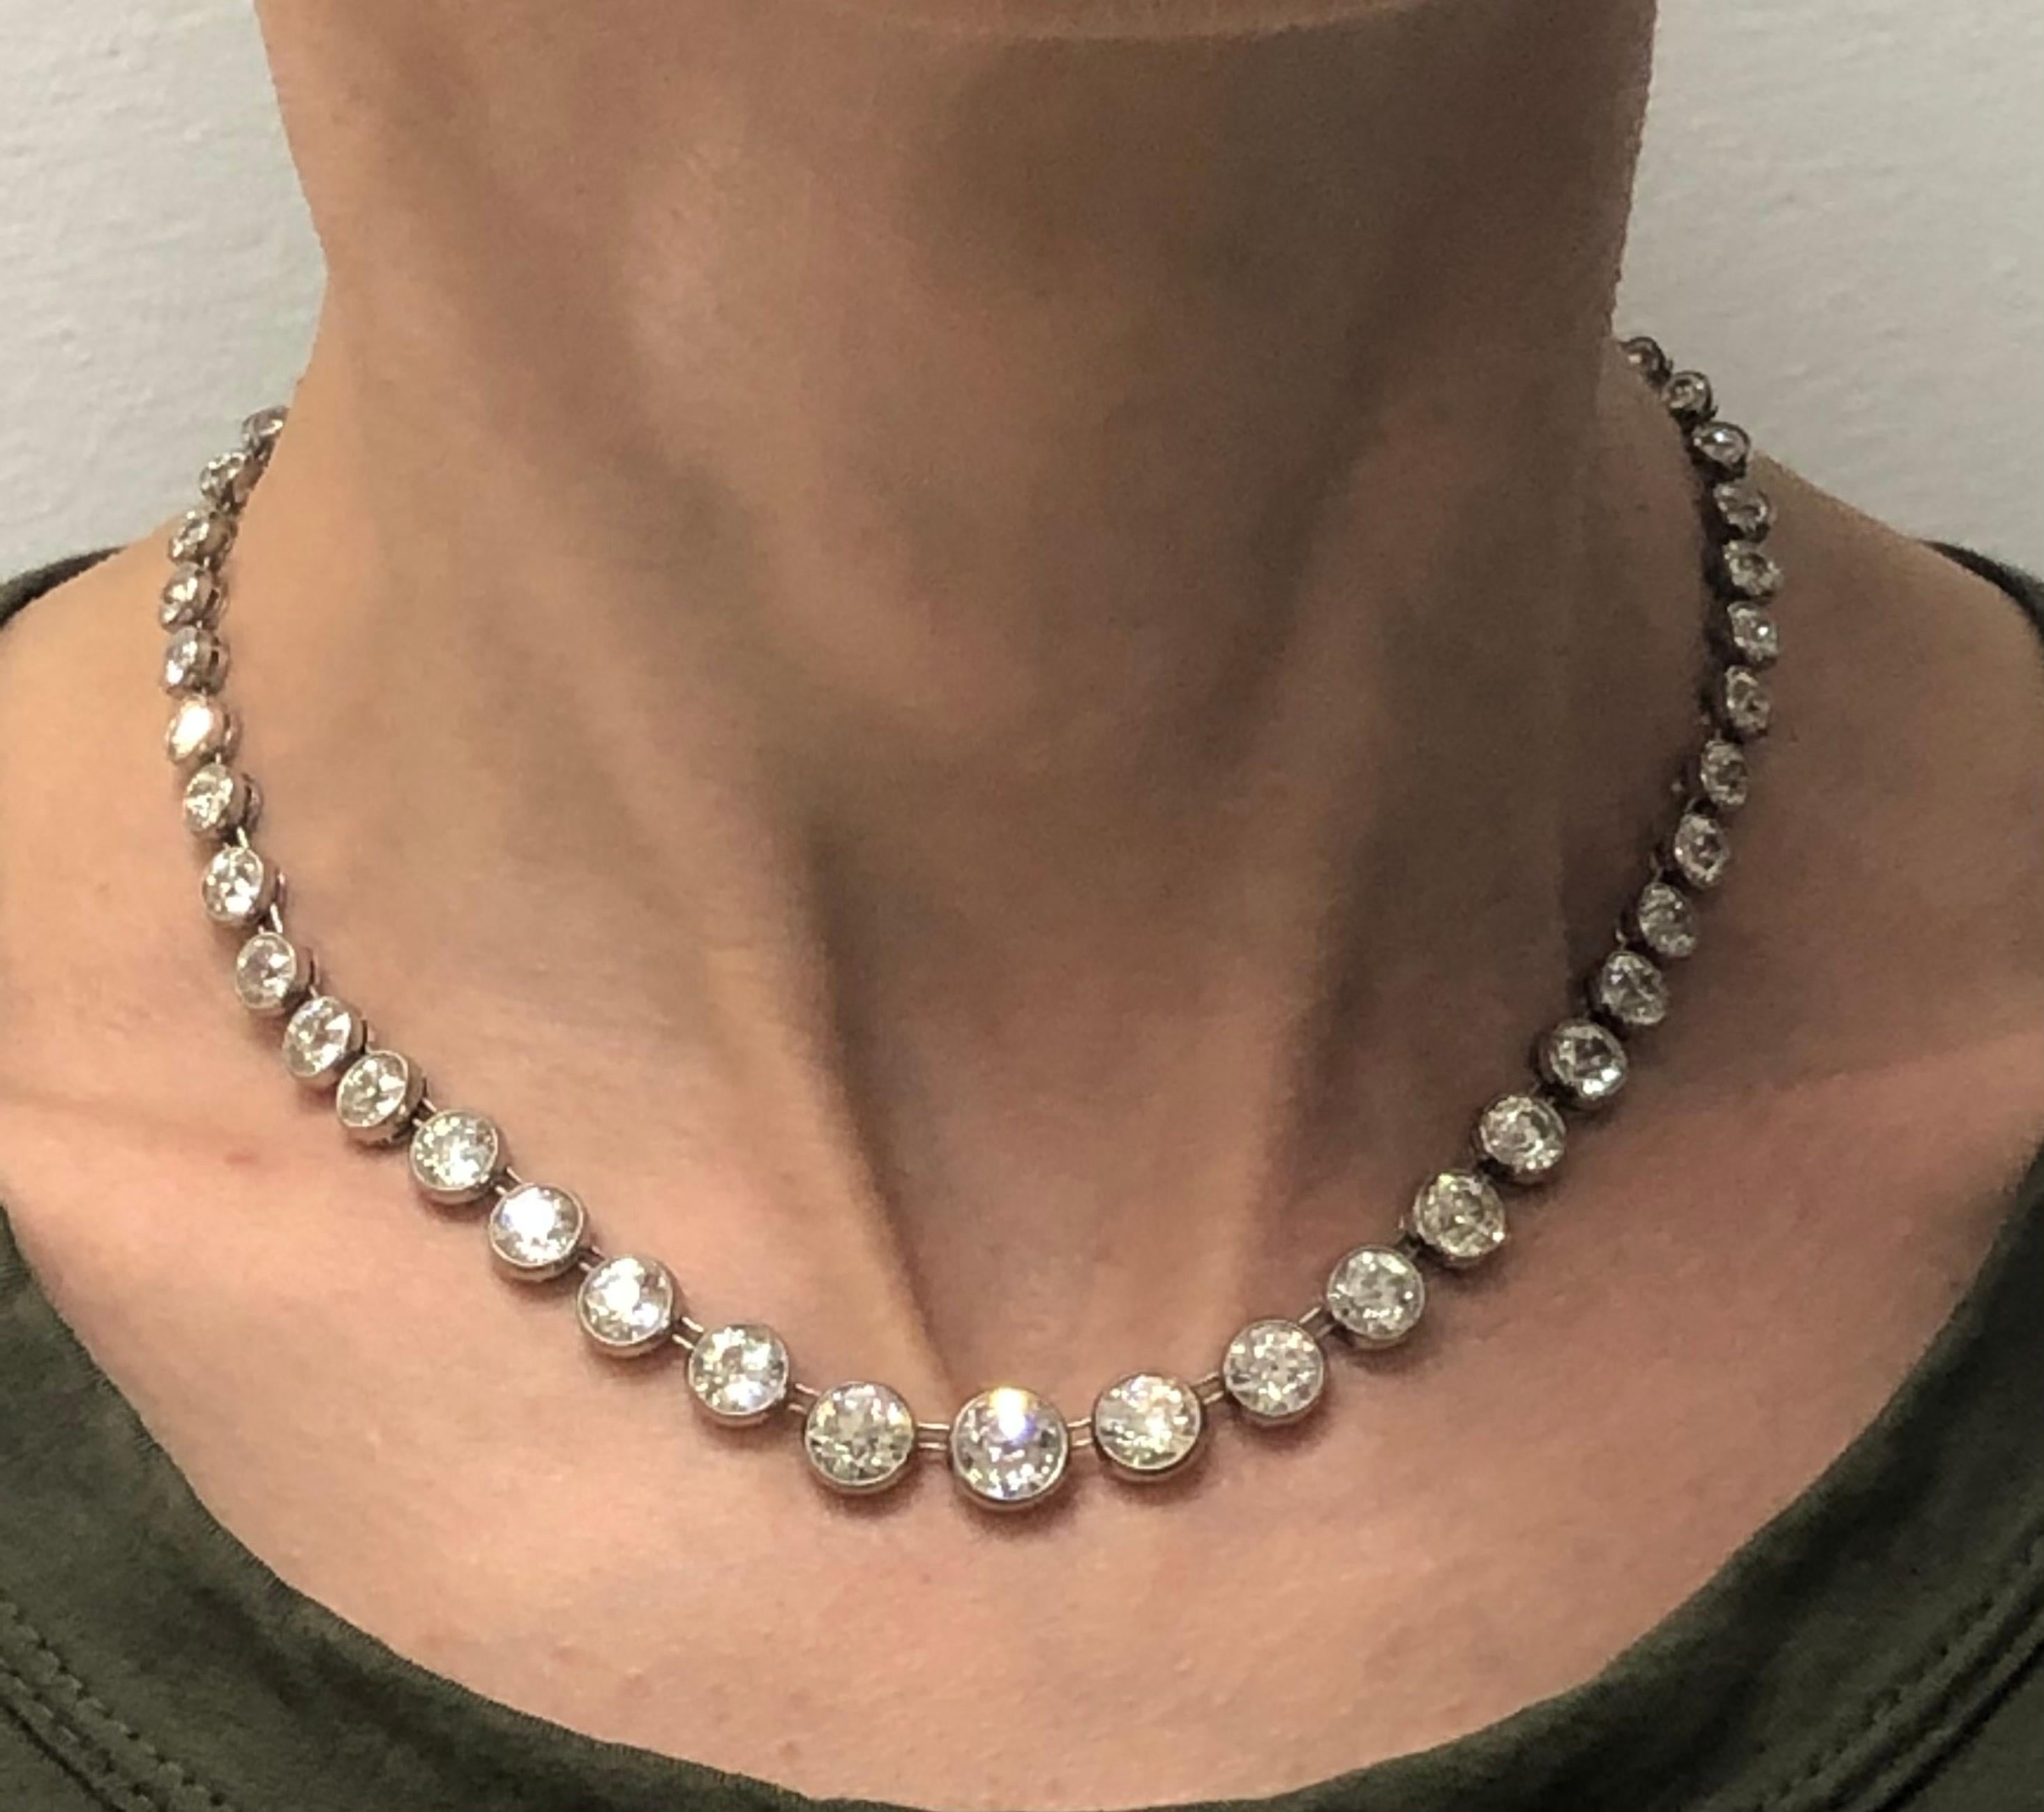 Gorgeous classy and timeless diamond riviere necklace created in the 1920s. Features sixty one Old European cut diamond set in platinum. The diamonds are graduating from 1.75 J/VS2 carat in the center to 0.07 carat towards the clasp (including two